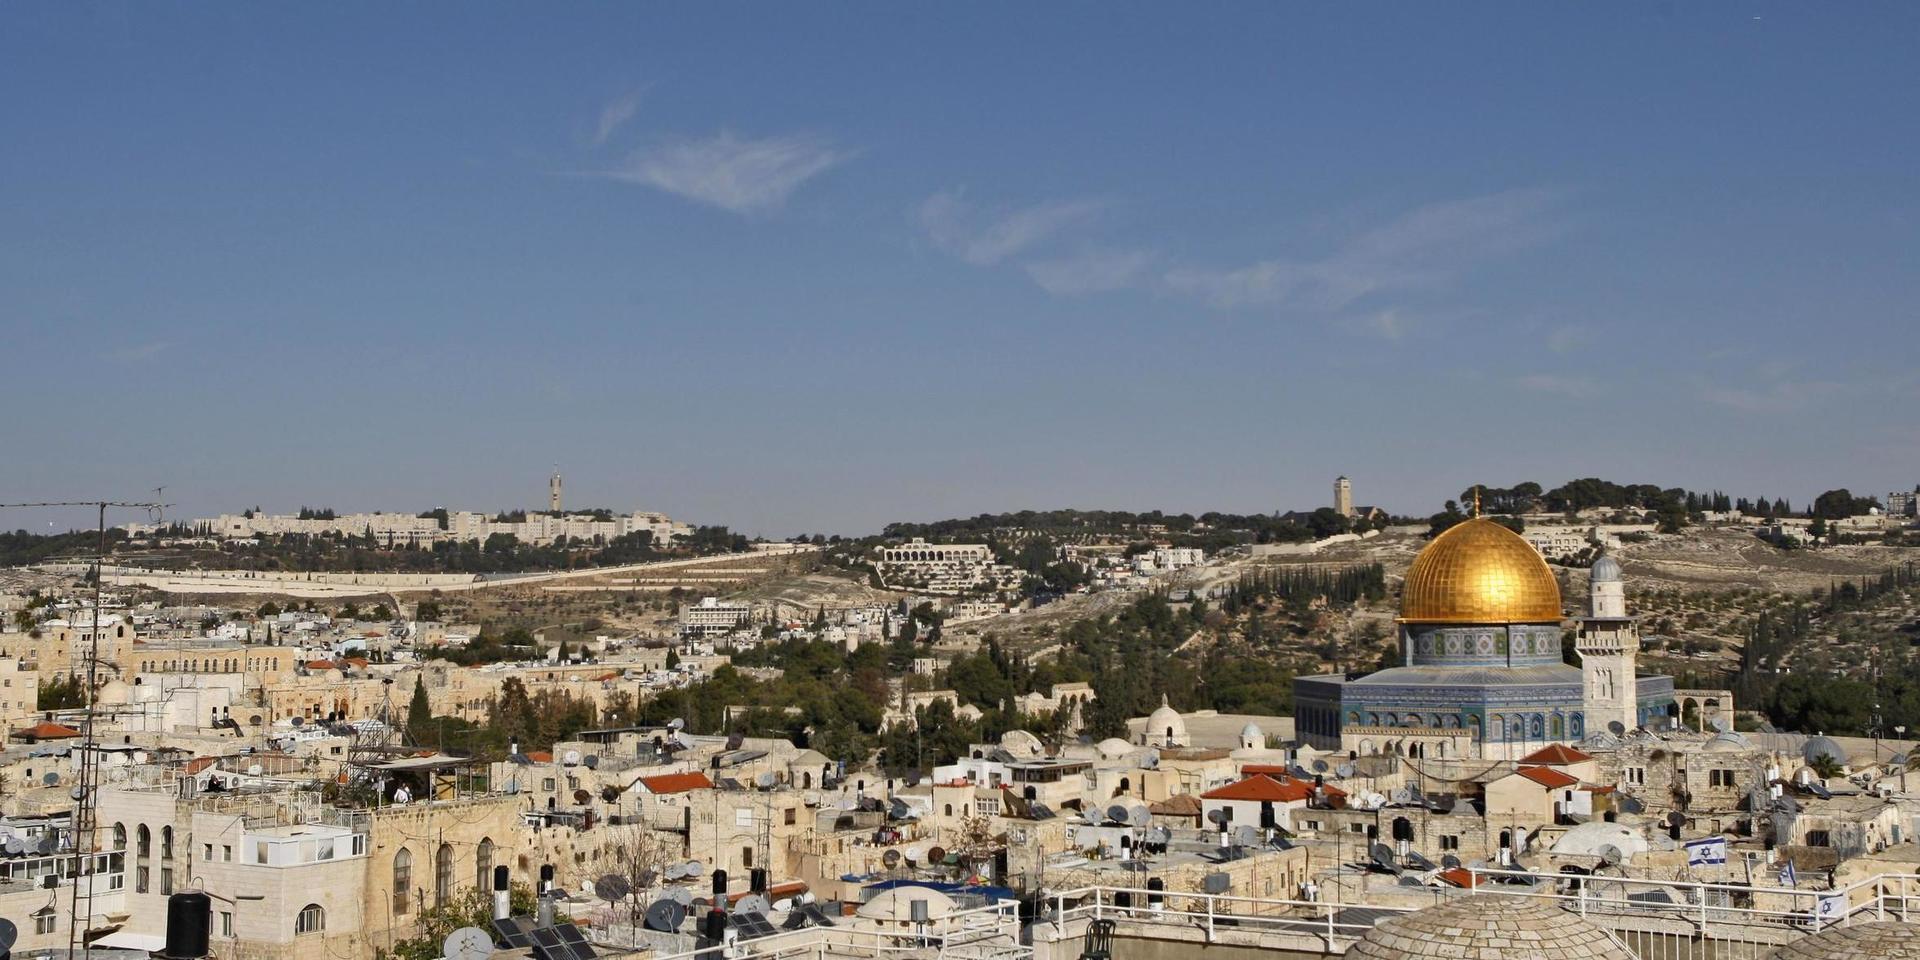 A view of Jerusalem's Old City with the Dome of the Rock Mosque, Tuesday, Dec. 1, 2009. Israel issued a stern warning to the EU on Tuesday over a purported plan to recognize east Jerusalem as the Palestinian capital, saying the proposal would damage Europe's credibility as a Mideast mediator. (AP Photo/Dan Balilty)